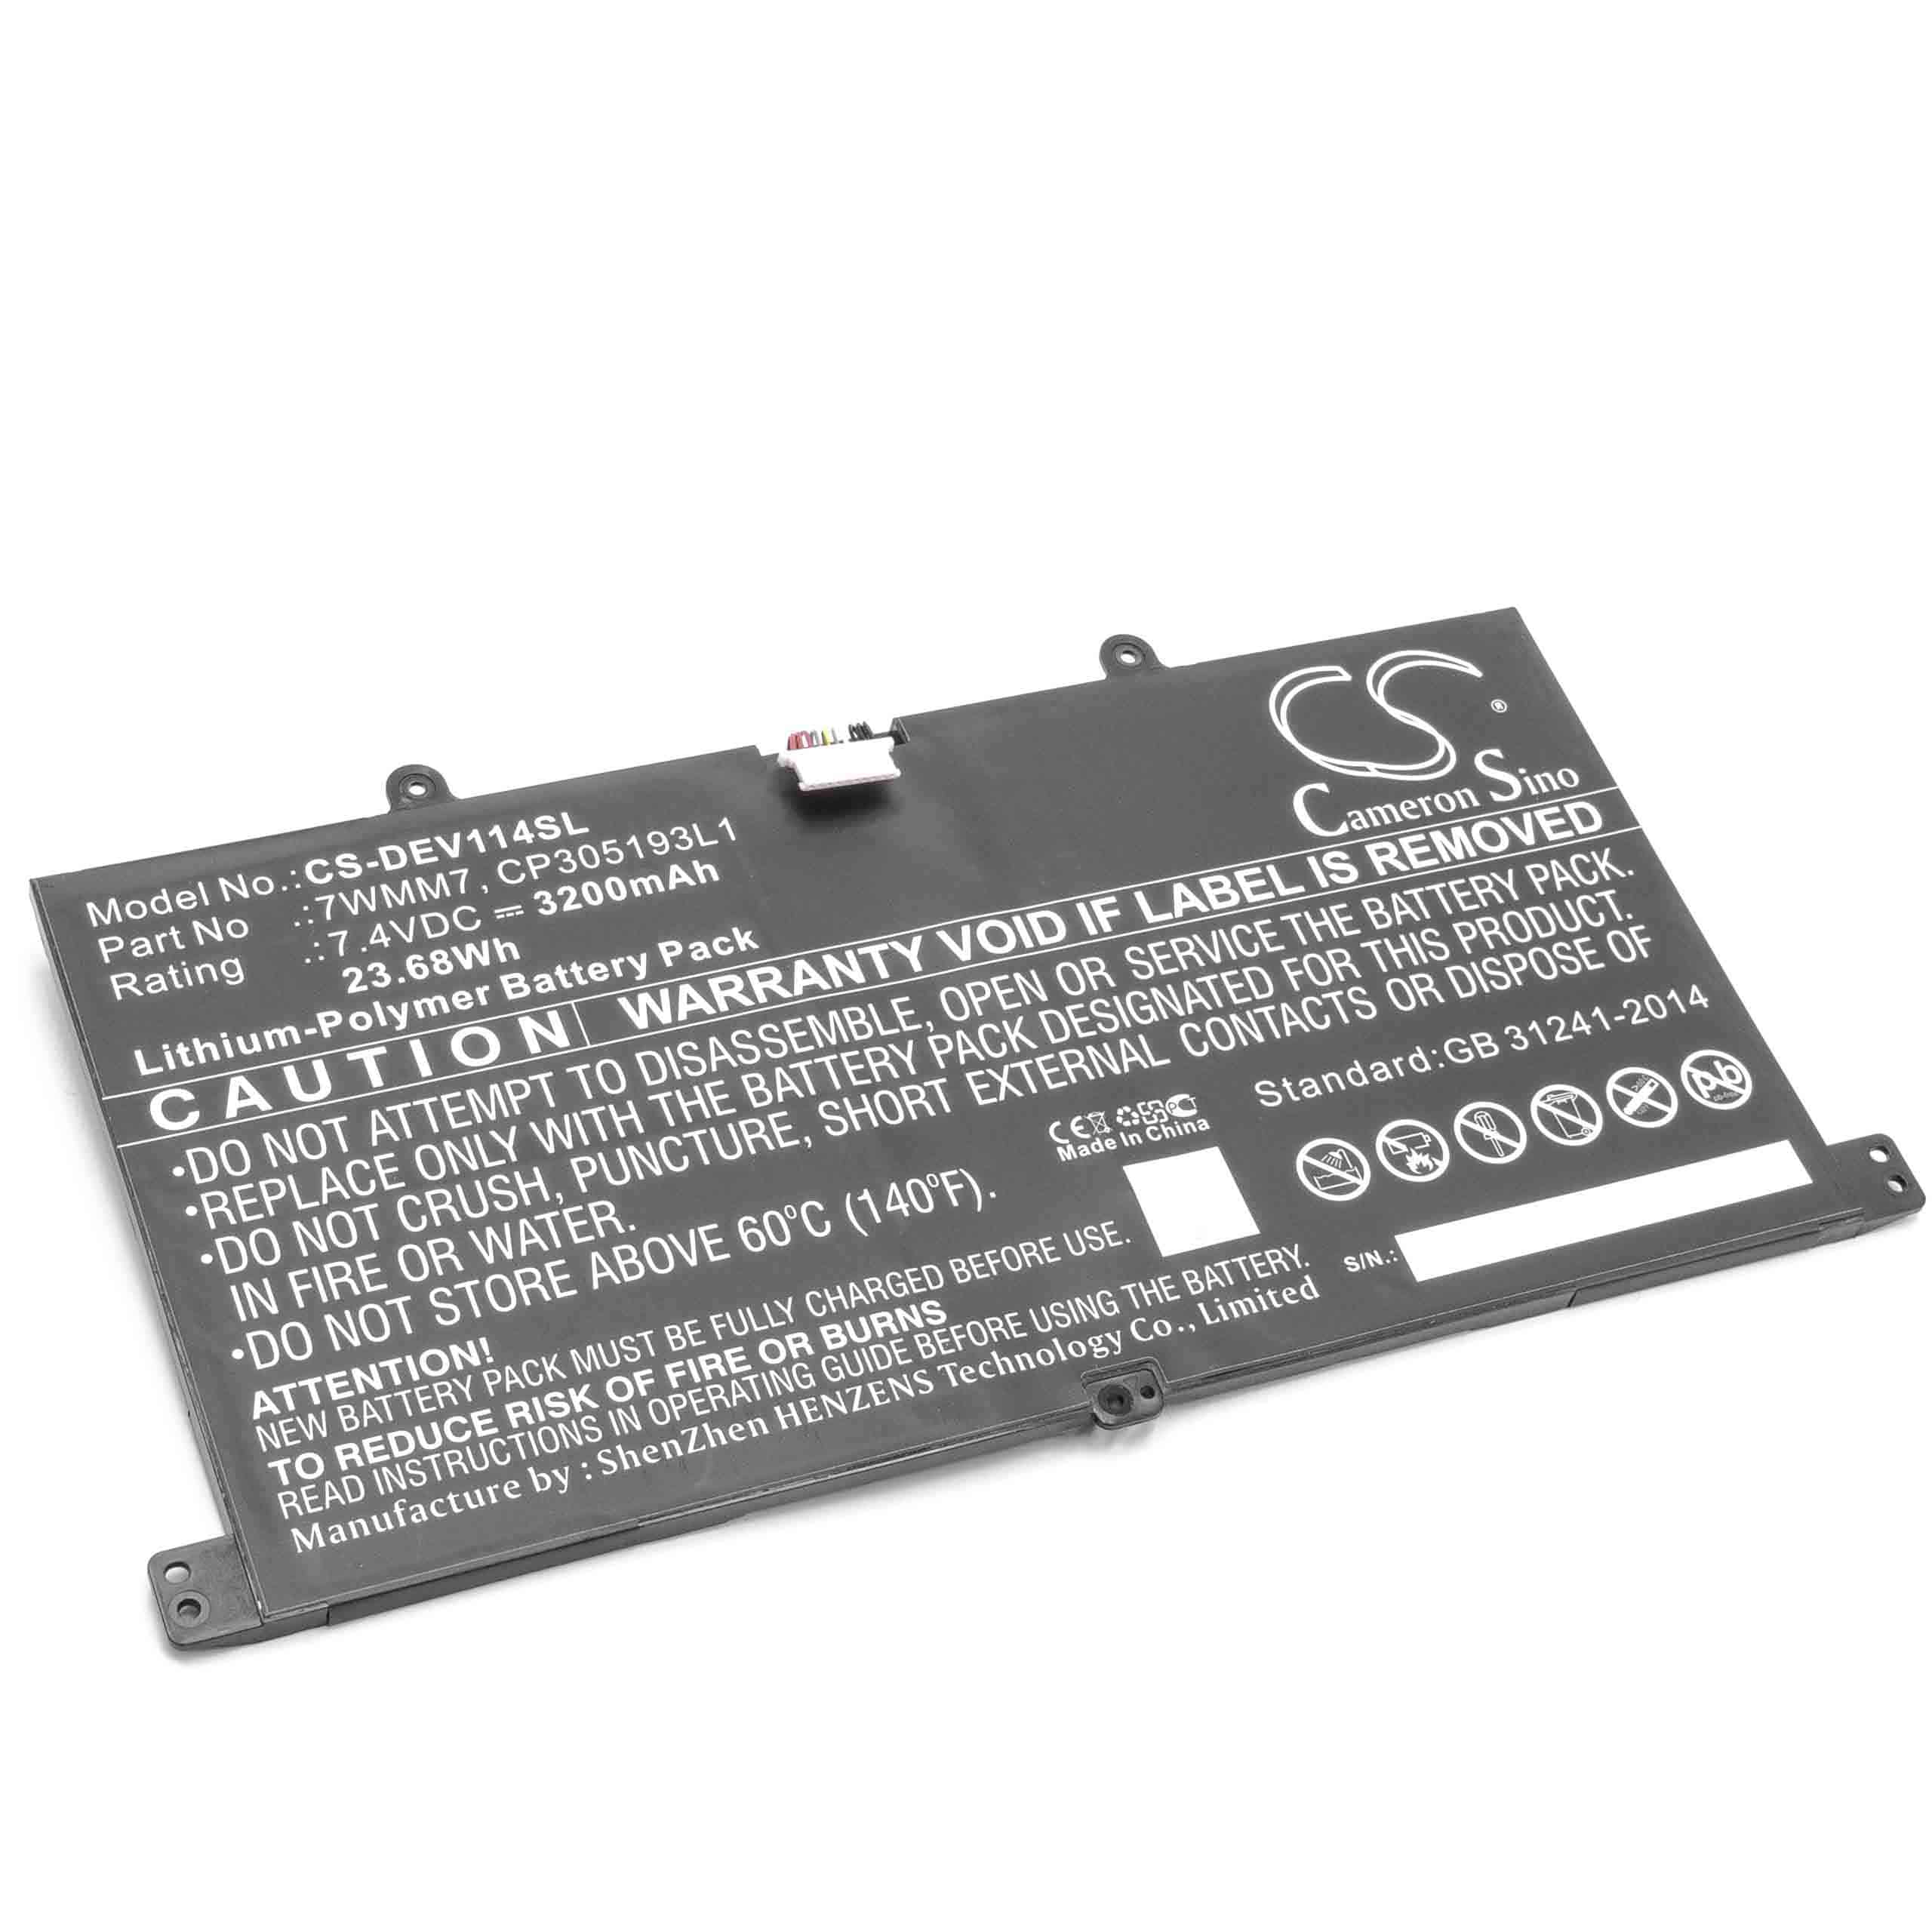 Wireless Keyboard Battery Replacement for Dell DL011301-PLP22G0, CP305193L1, 7WMM7 - 3200mAh 7.4V Li-polymer